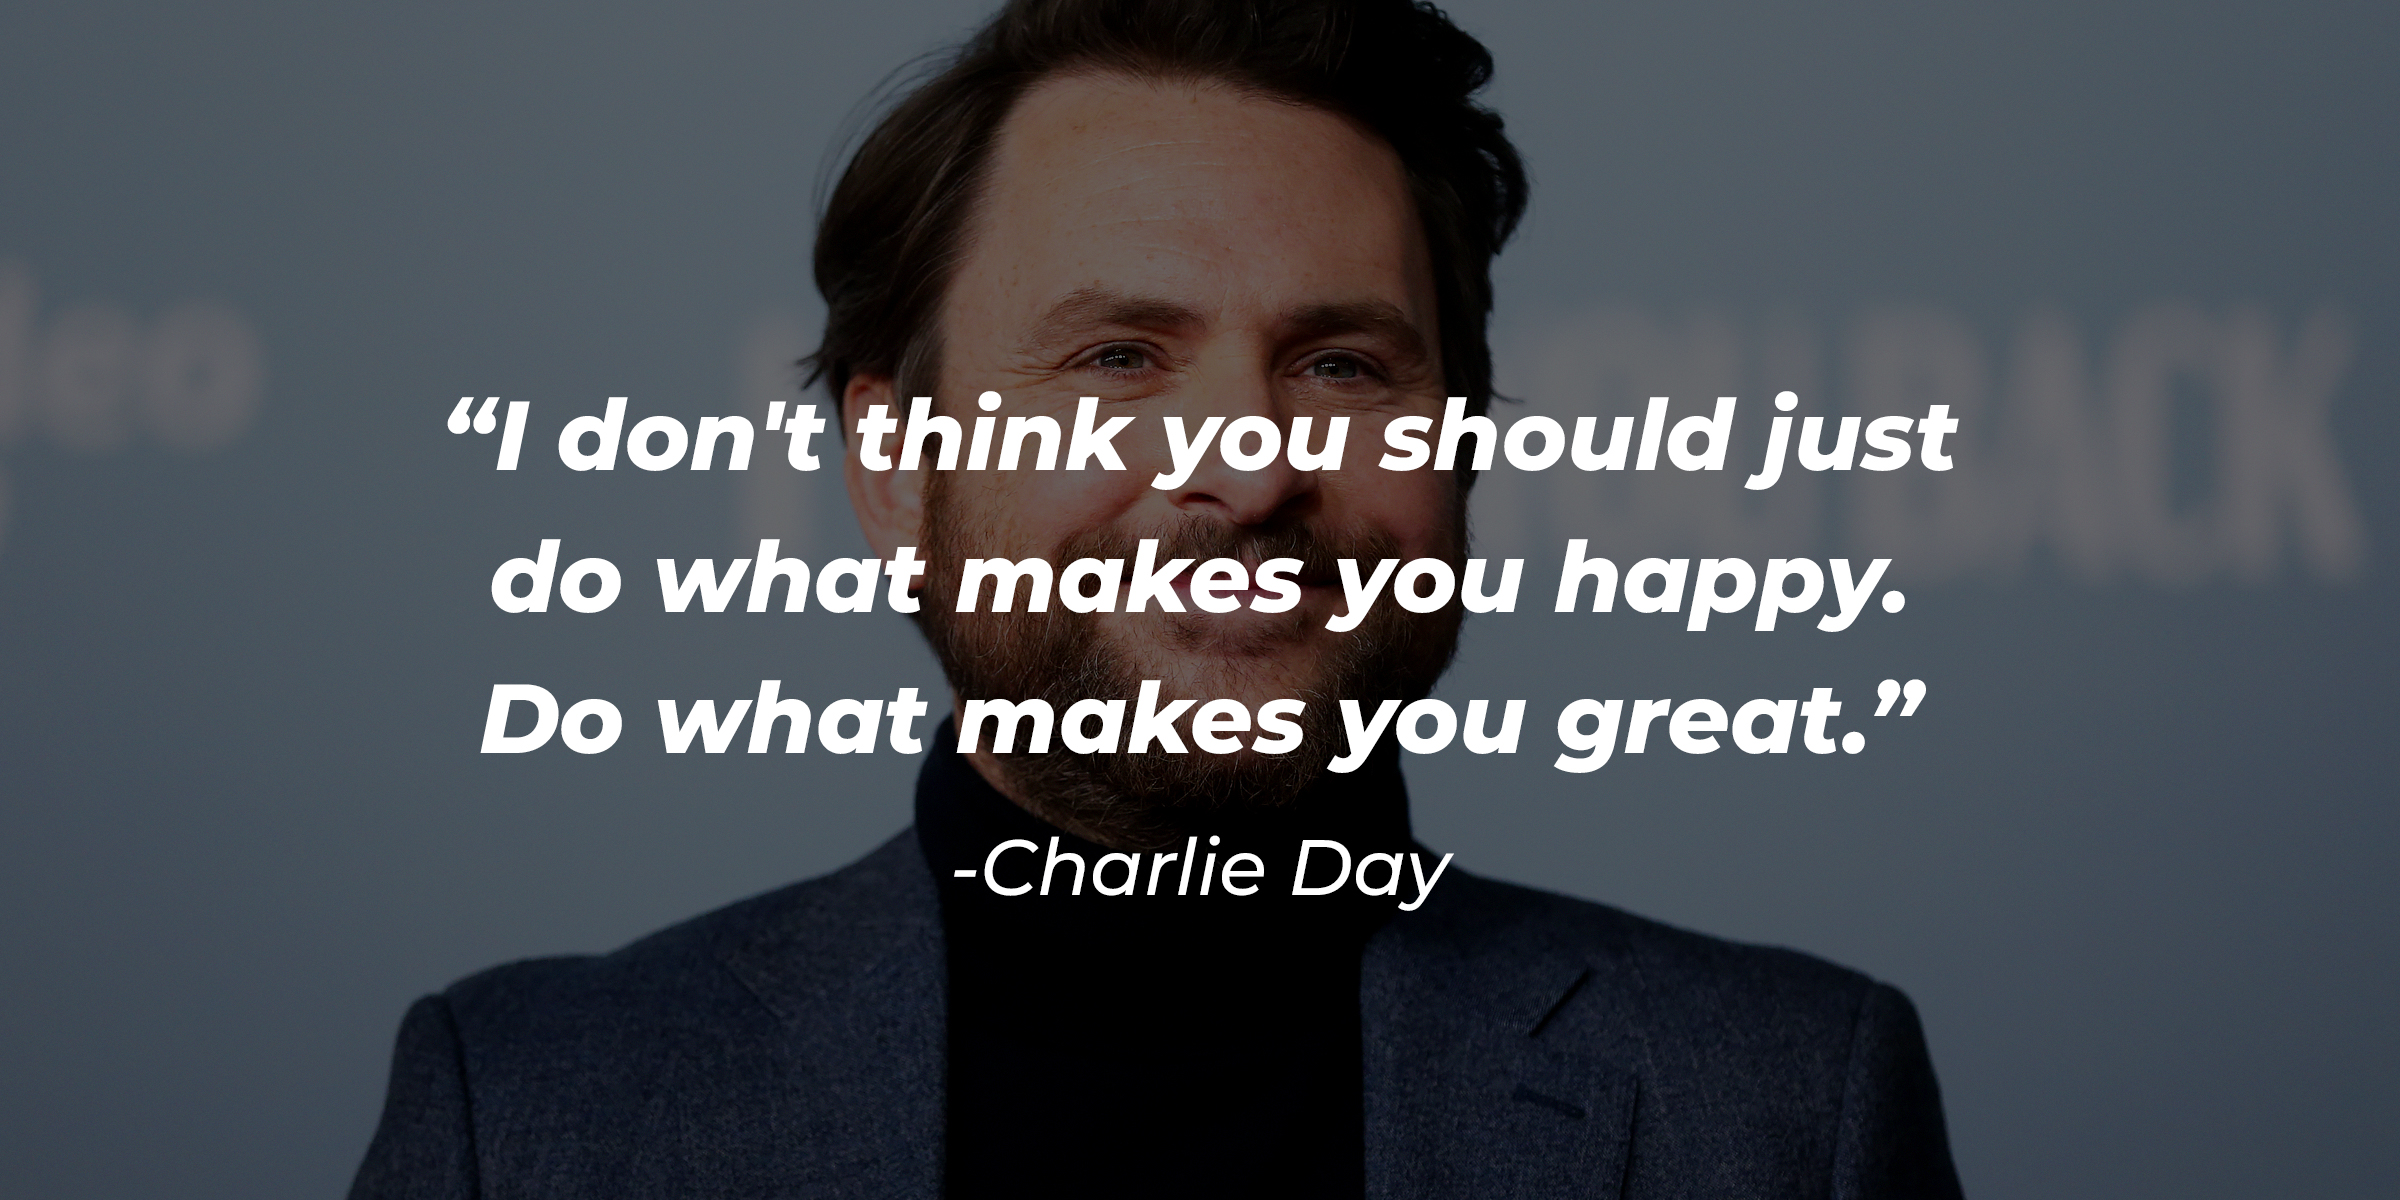 An image of Charlie Day with the quote: “I don't think you should just do what makes you happy. Do what makes you great.” | Source: Getty Images